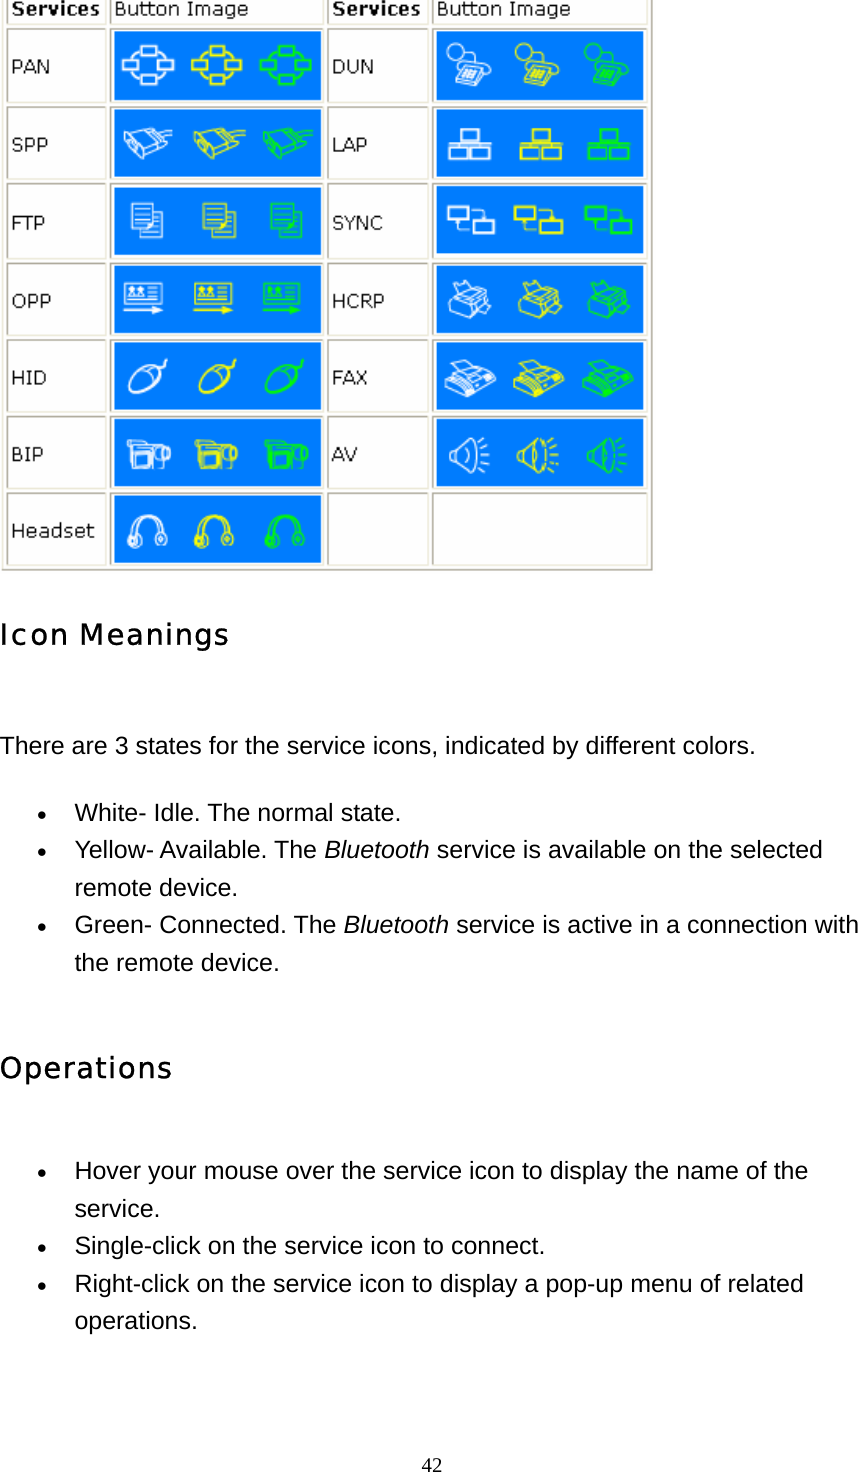   42 Icon Meanings  There are 3 states for the service icons, indicated by different colors.   • White- Idle. The normal state.   • Yellow- Available. The Bluetooth service is available on the selected remote device.   • Green- Connected. The Bluetooth service is active in a connection with the remote device.   Operations • Hover your mouse over the service icon to display the name of the service.  • Single-click on the service icon to connect.   • Right-click on the service icon to display a pop-up menu of related operations.  